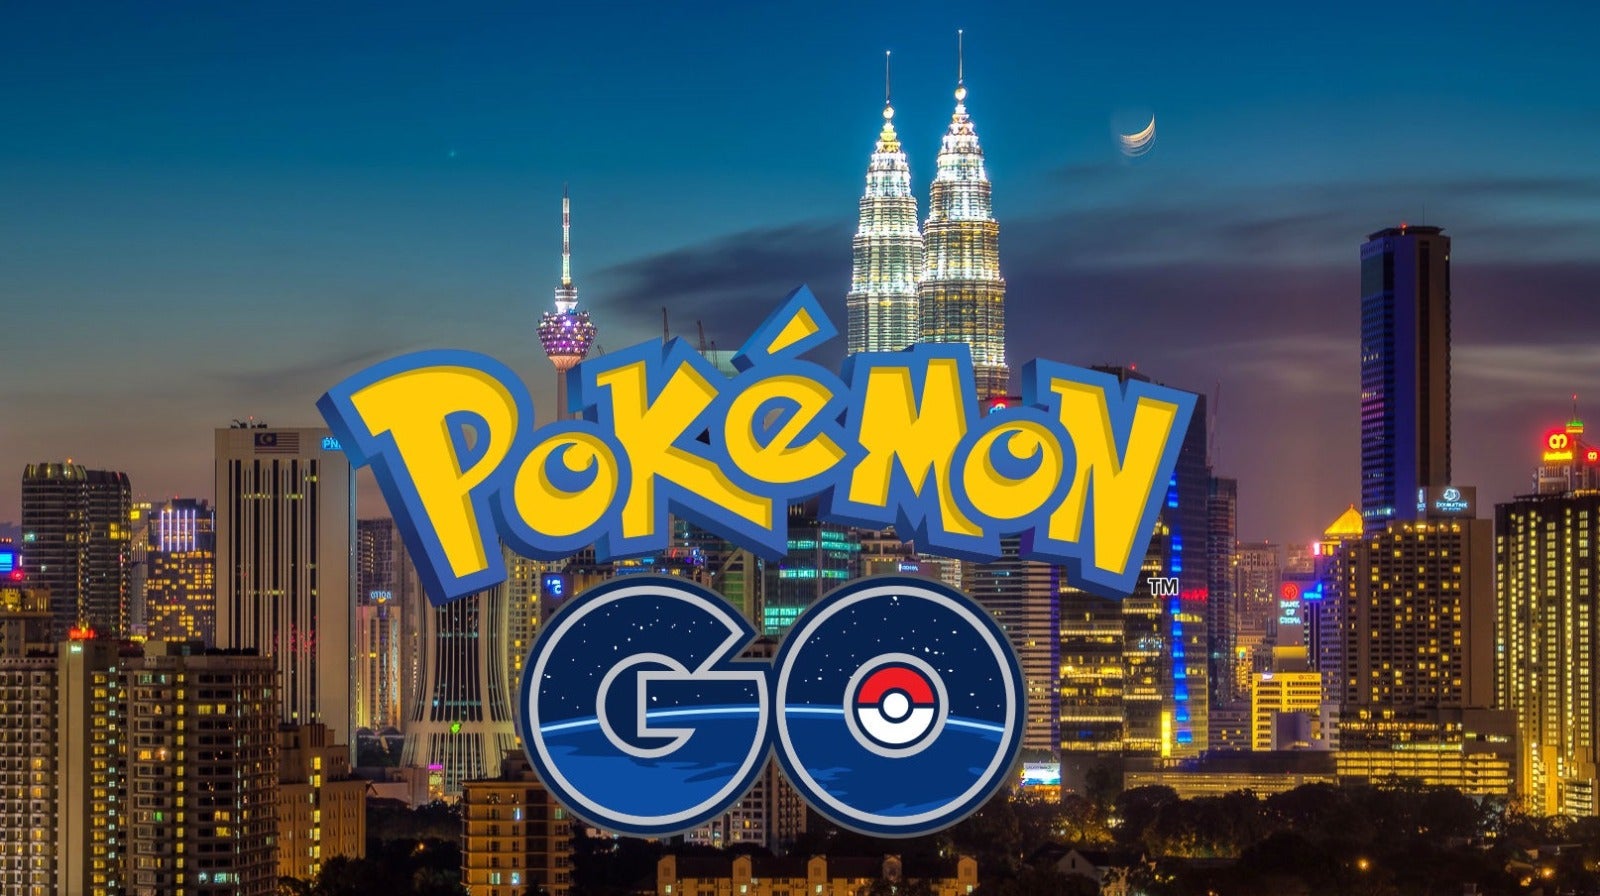 Pokemon Go Finally To Hit Asia In Less Than 24 Hours! - World Of Buzz 1